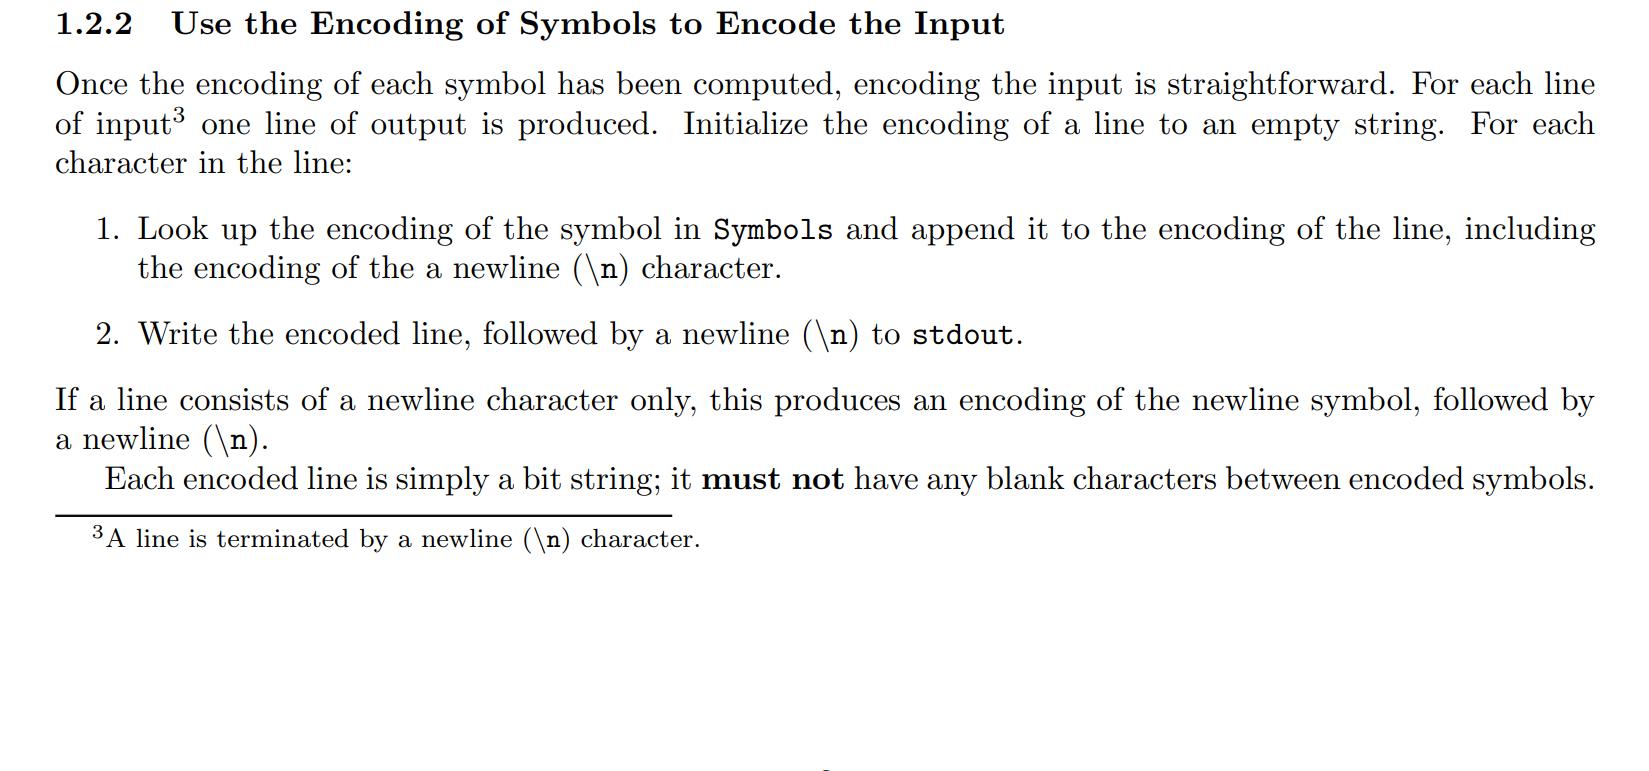 1.2.2 Use the Encoding of Symbols to Encode the Input Once the encoding of each symbol has been computed, encoding the input